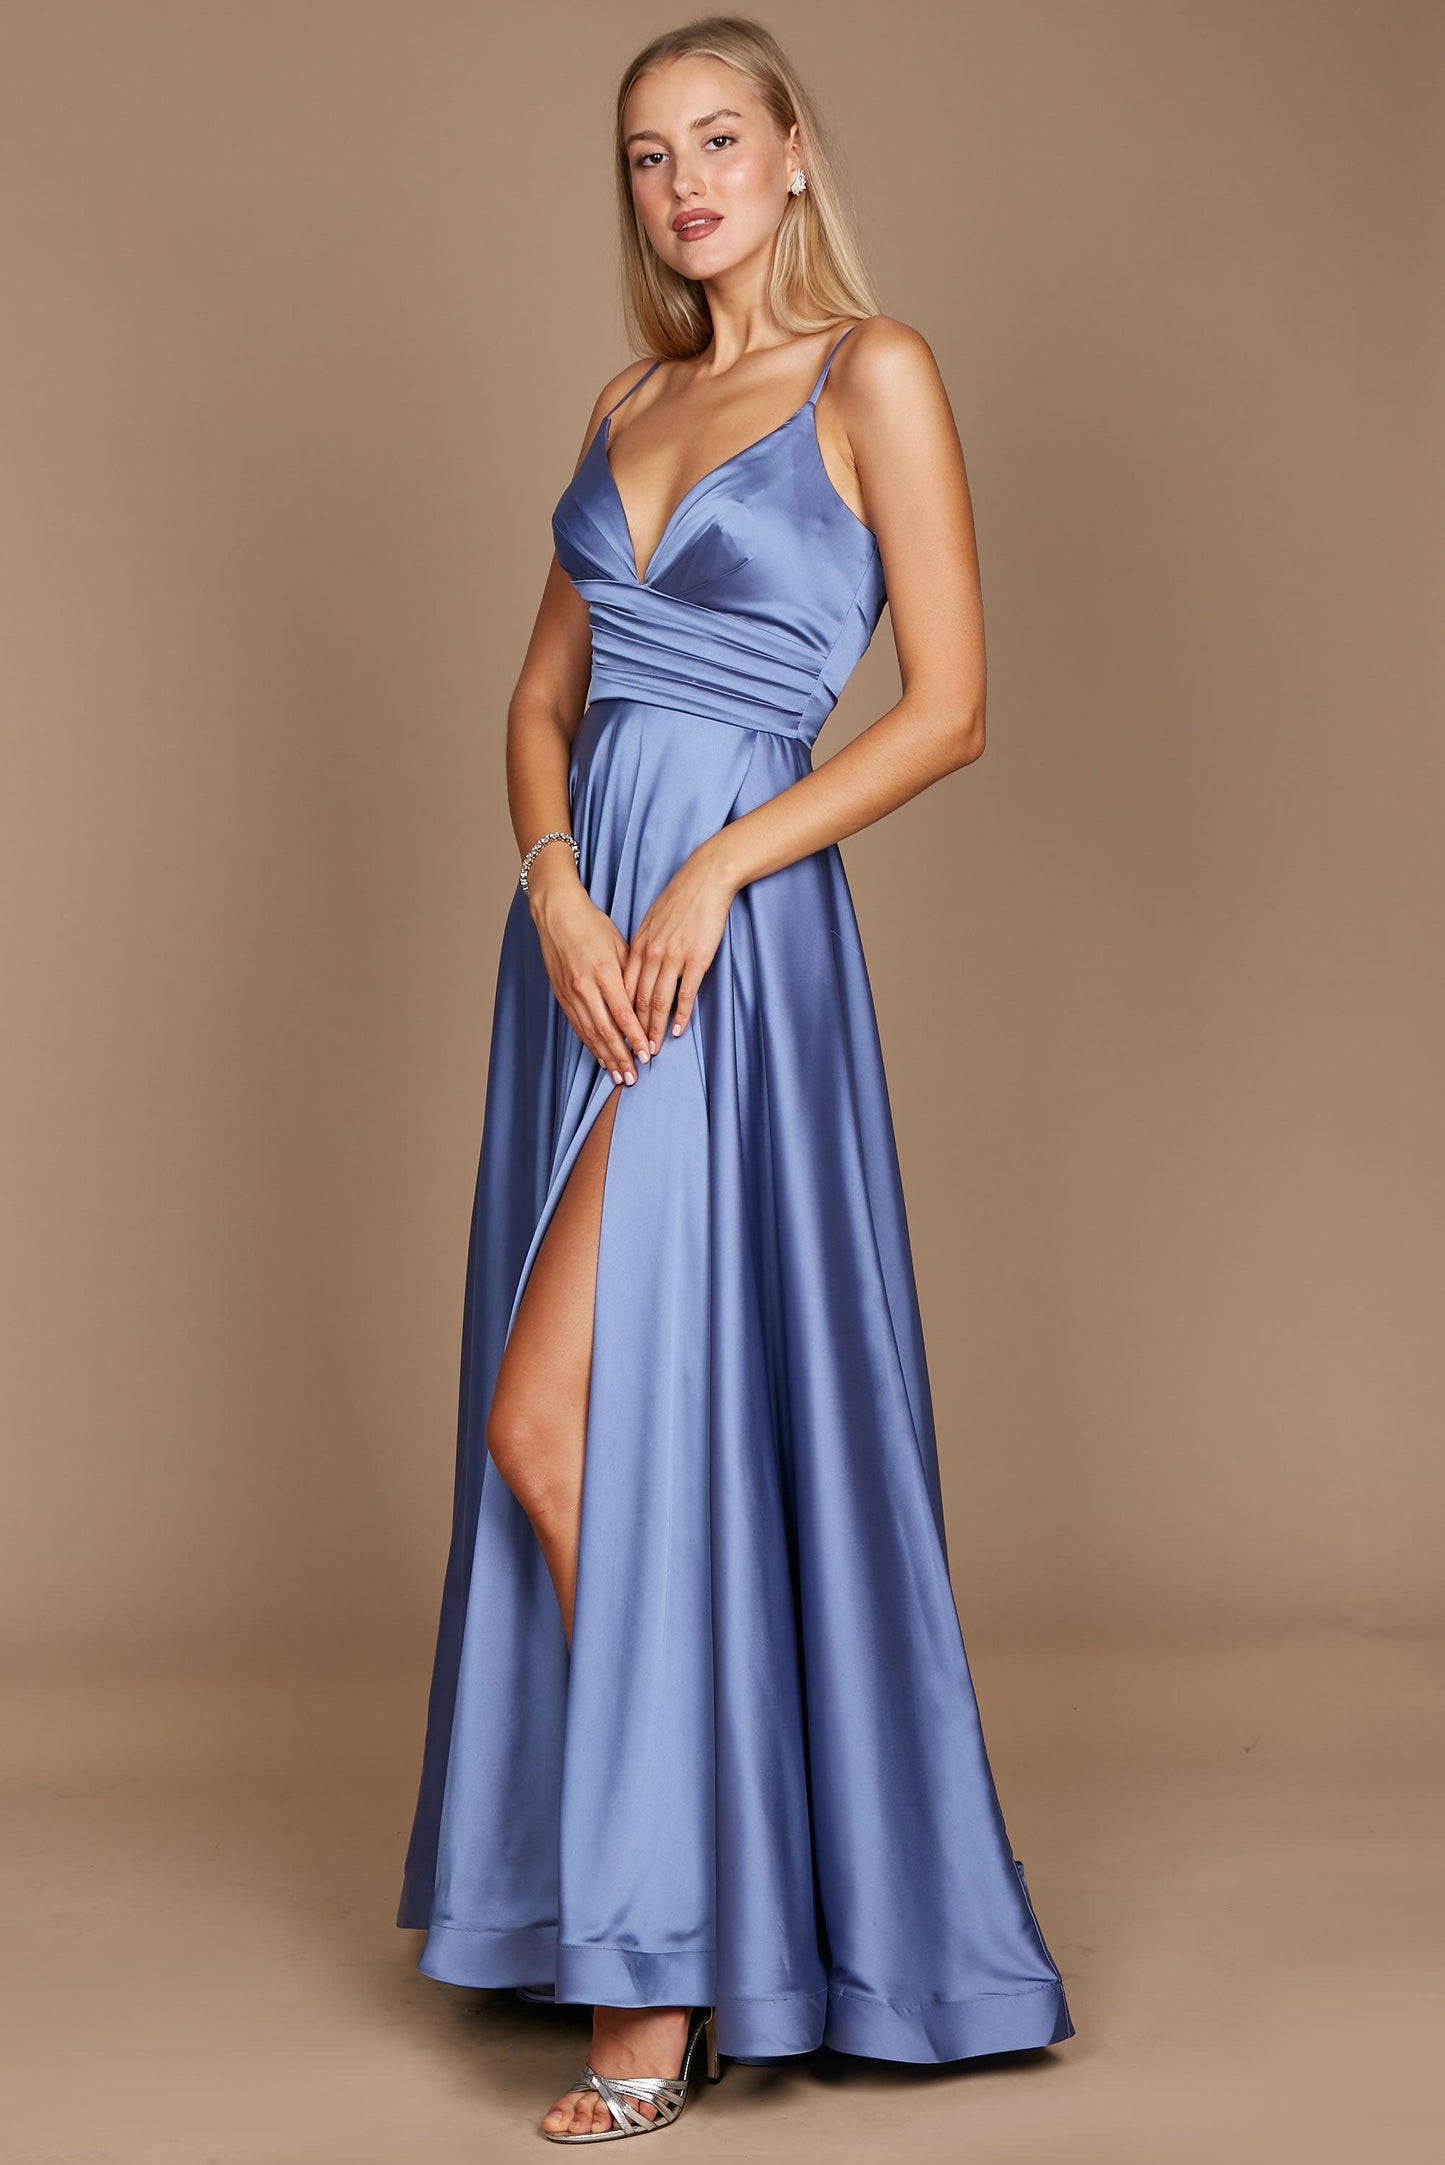 Prom Dresses Long Spaghetti Strap Prom Formal Gown Smoky Blue